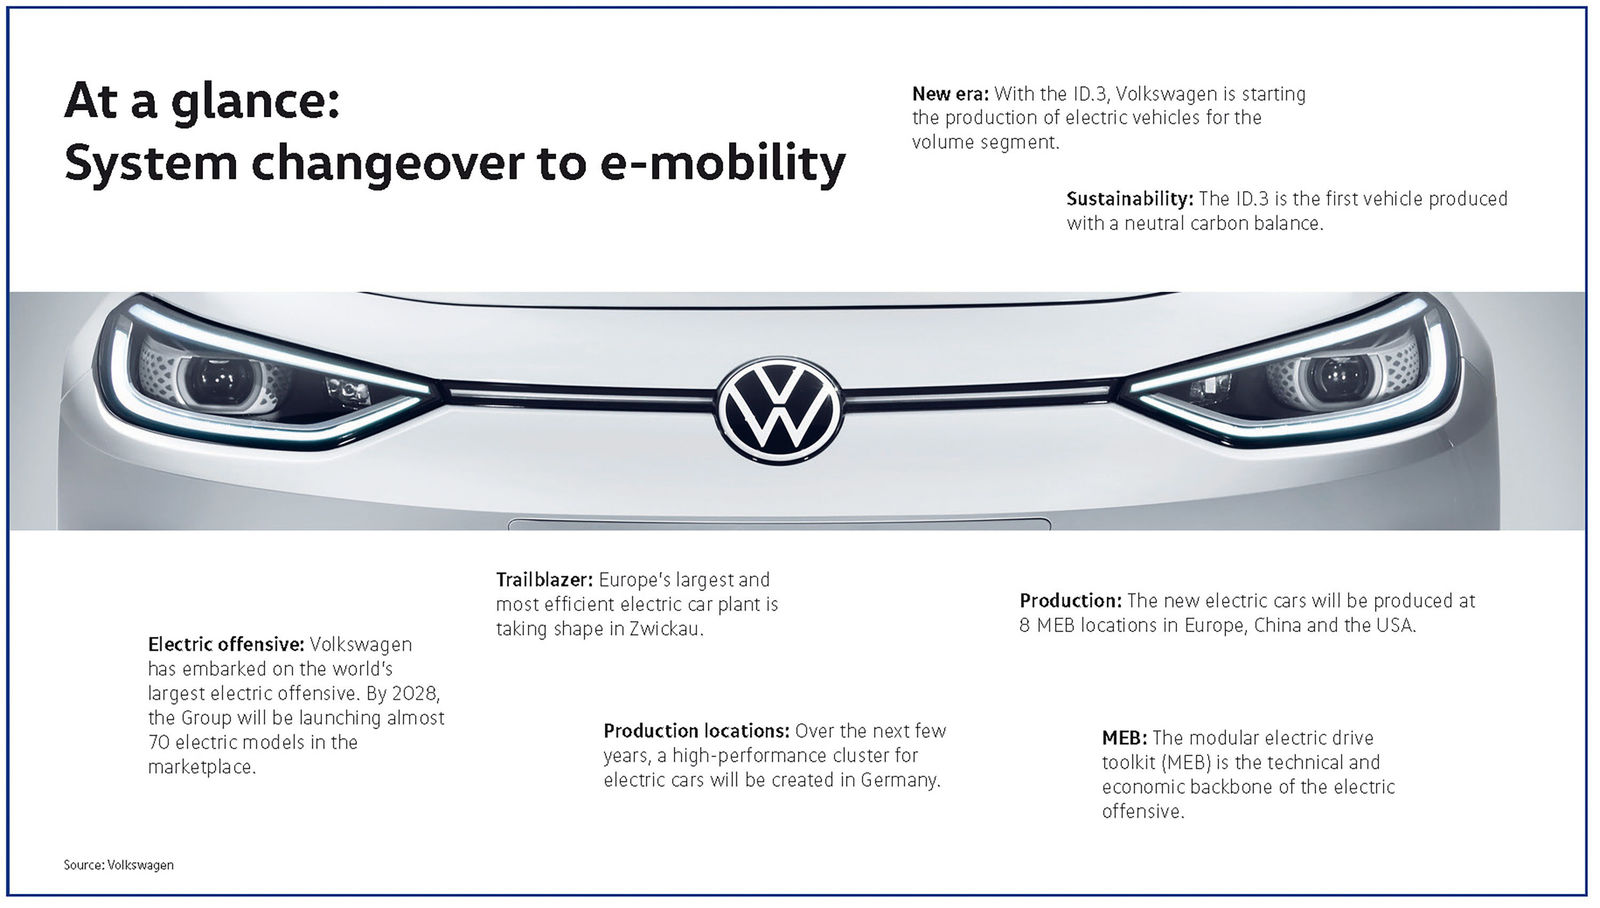 At a glance: System changeover to e-mobility